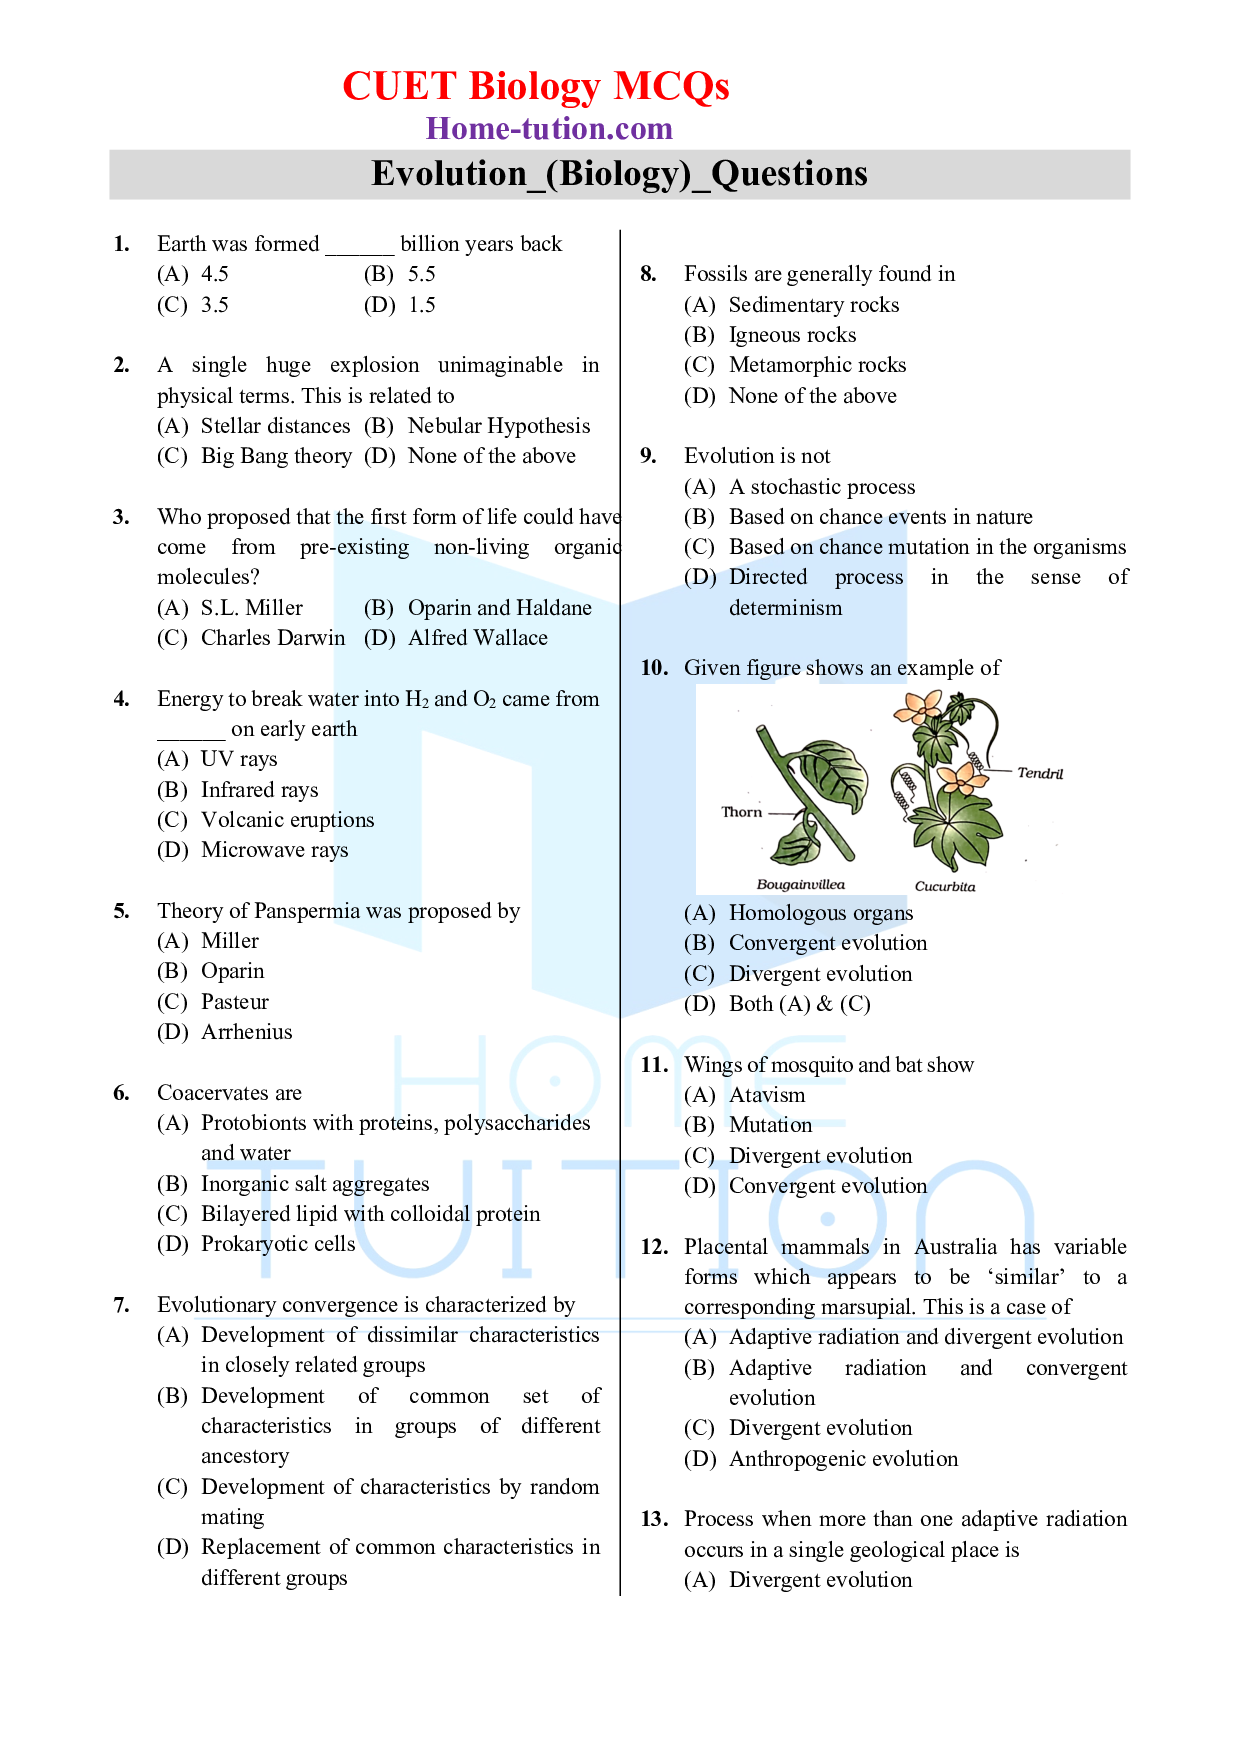 Biology MCQ Questions for CUET Chapter 7 Evolution